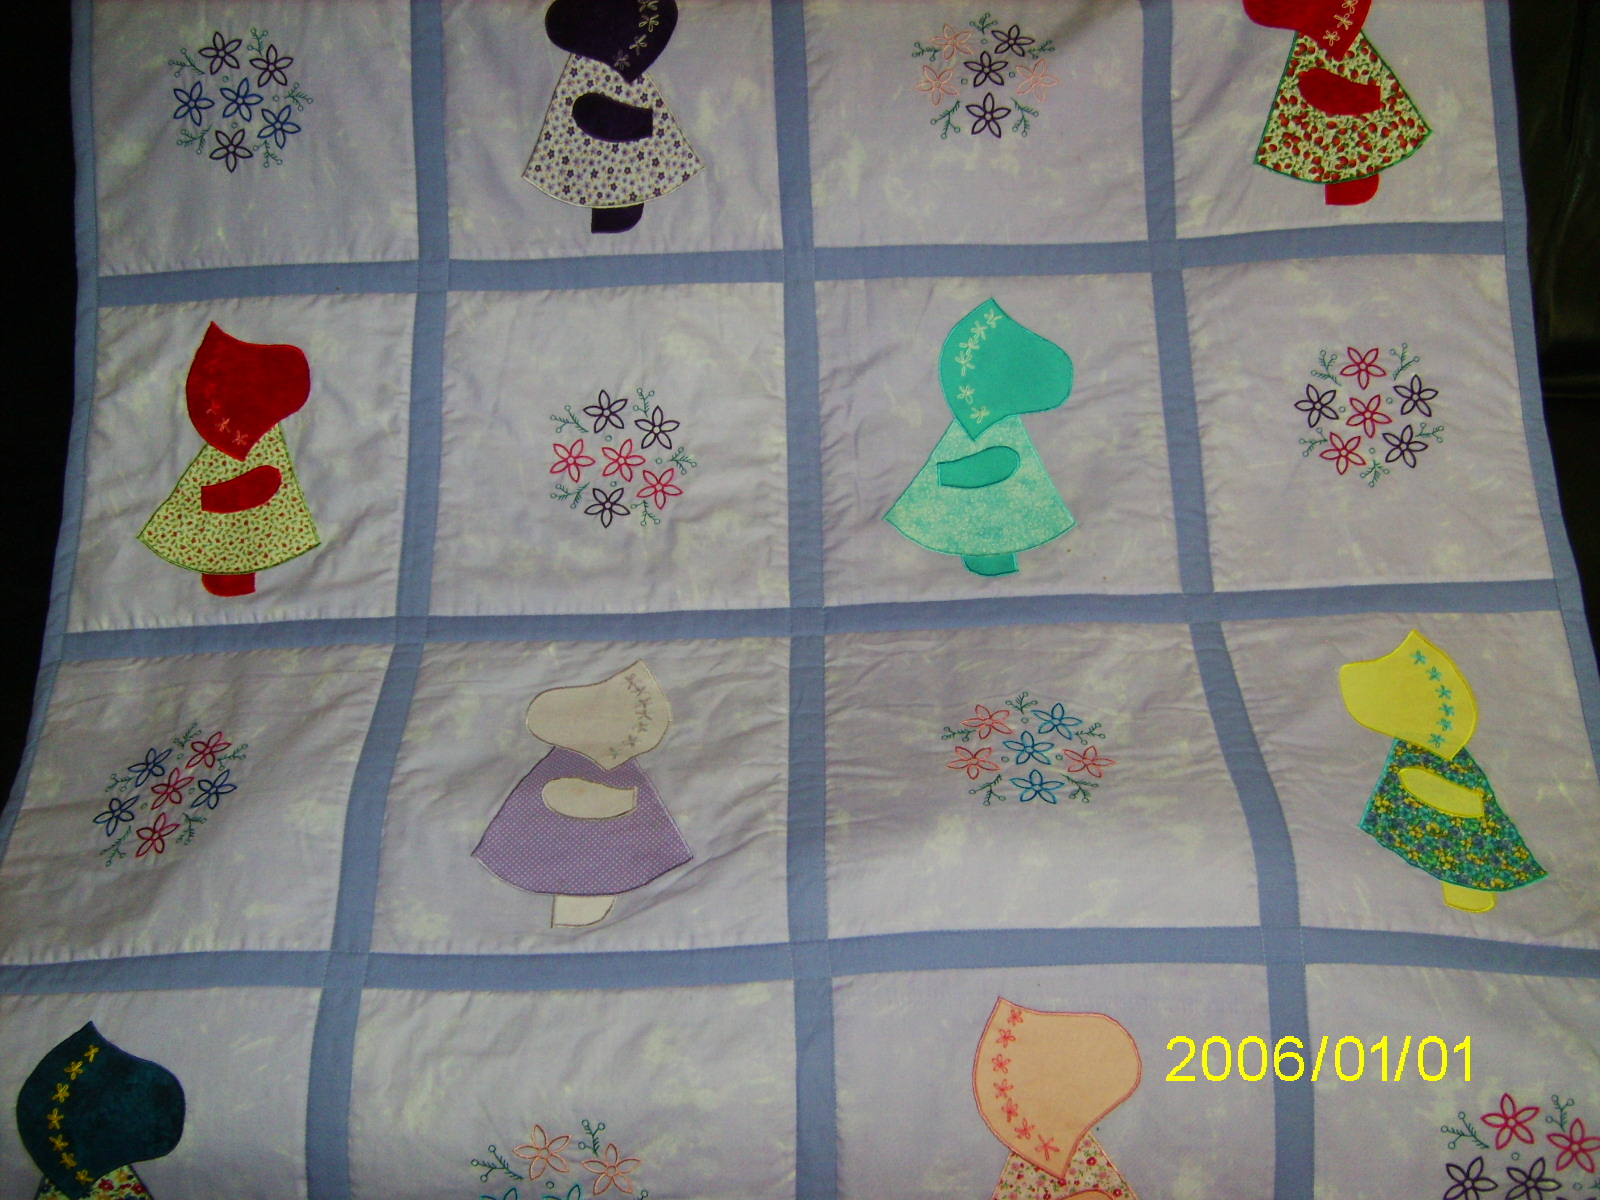 Sunbonnet Sue Embroidery Patterns Free Embroidery Designs Cute Embroidery Designs